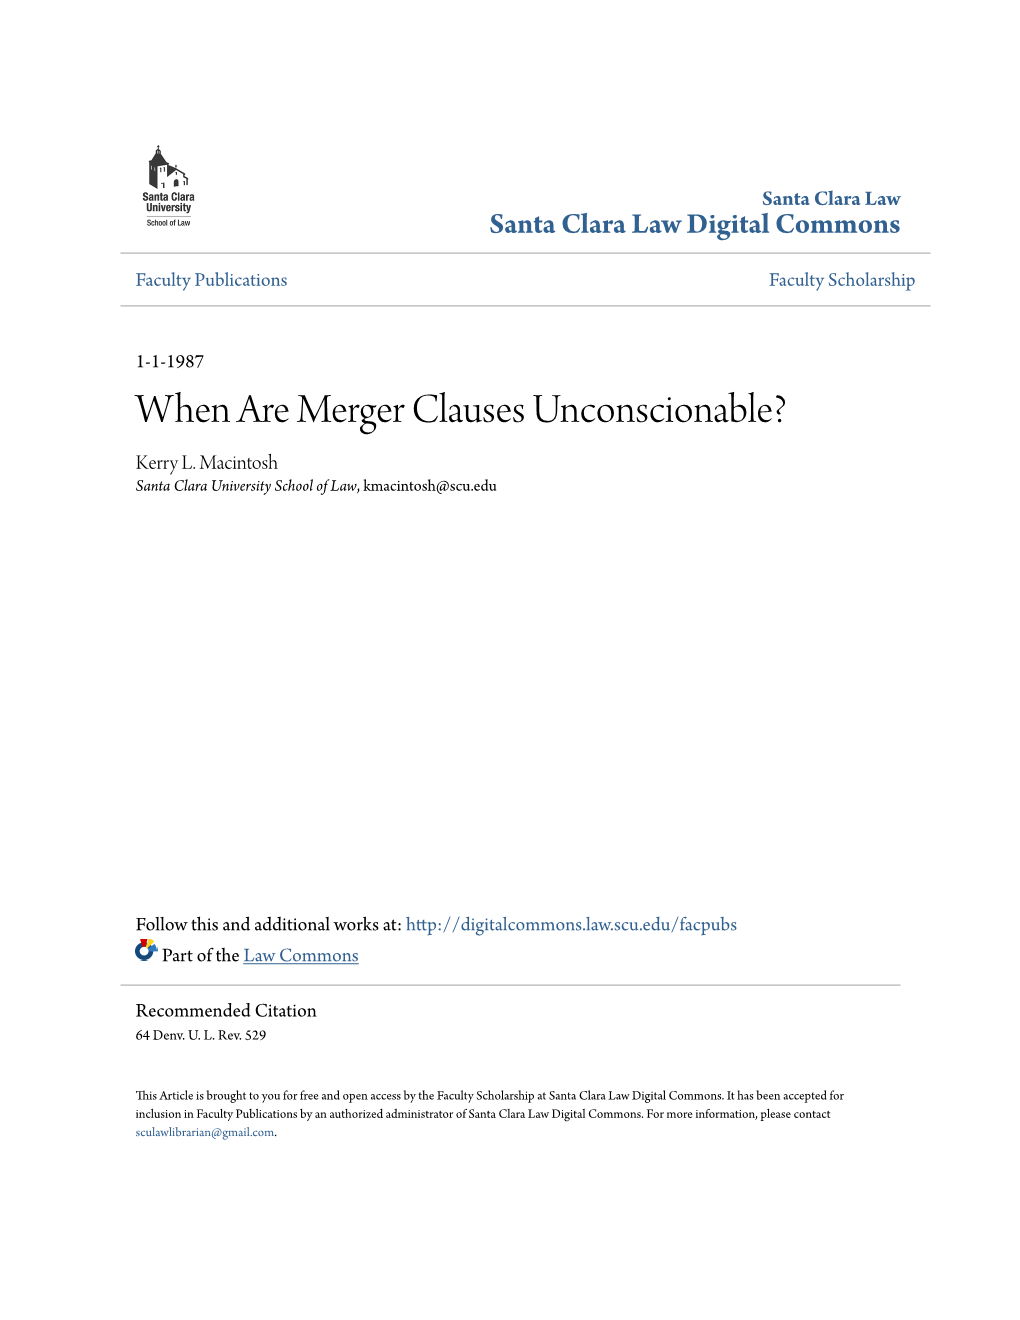 When Are Merger Clauses Unconscionable? Kerry L